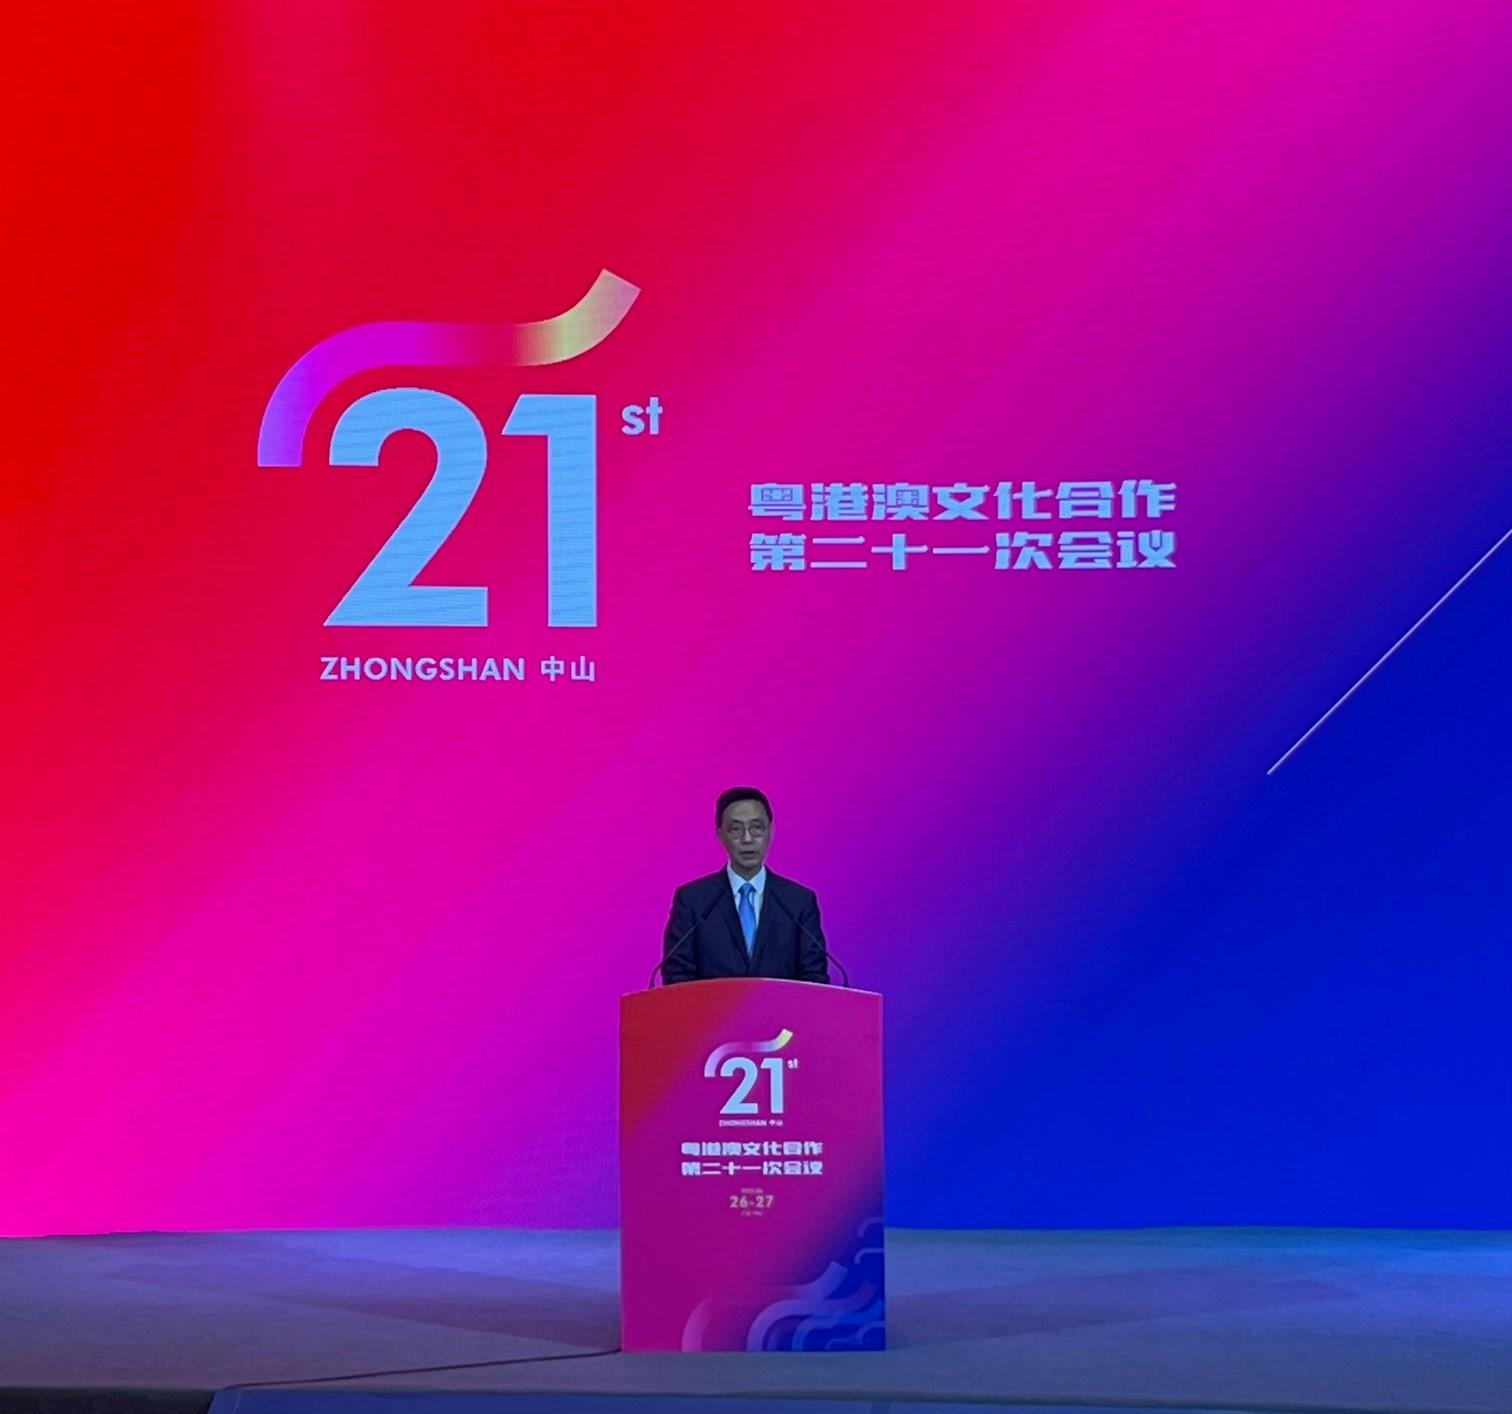 The Secretary for Culture, Sports and Tourism, Mr Kevin Yeung, gives closing remarks at the 21st Greater Pearl River Delta Cultural Cooperation Meeting in Zhongshan today (June 27).